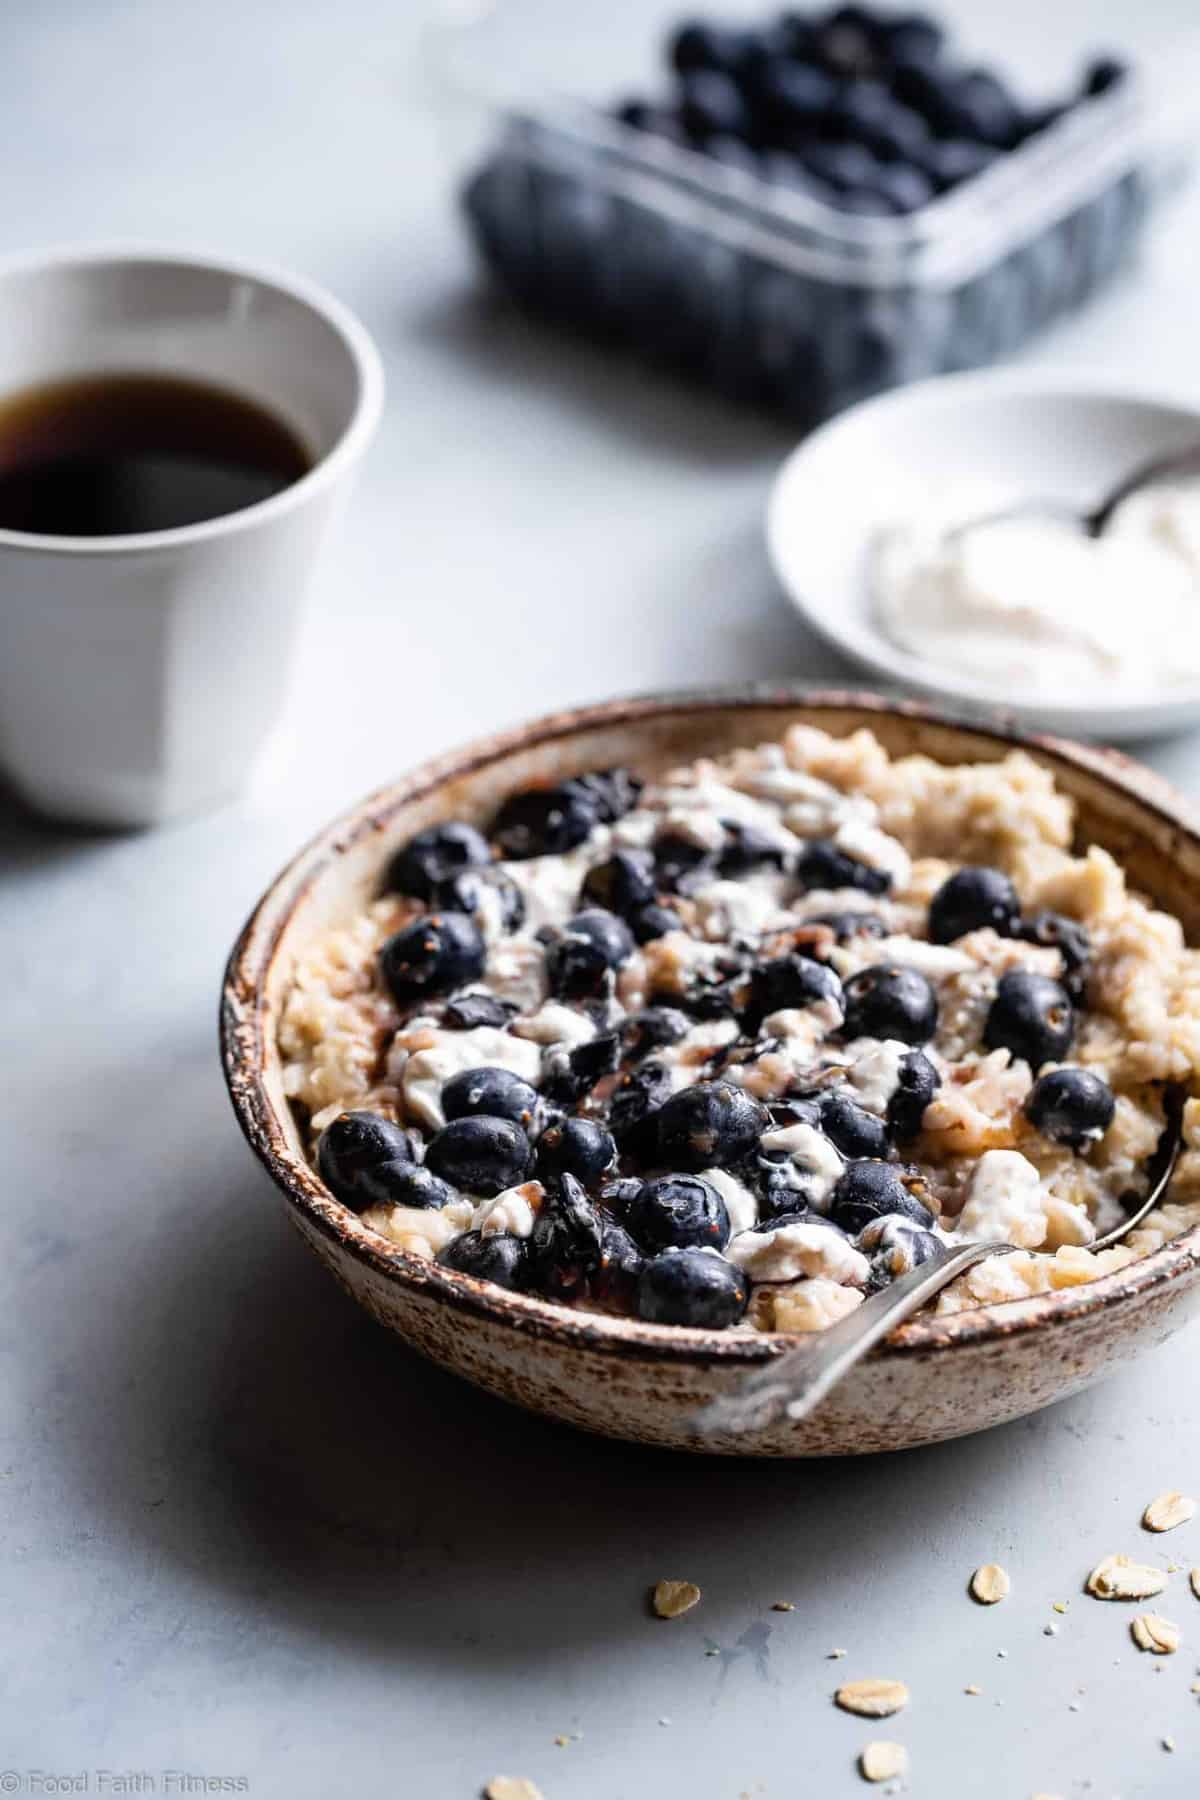 Blueberry Cheesecake Oatmeal - This quick and easy Blueberry Oatmeal with Cheesecake Swirl is a healthy, low fat and gluten free breakfast that tastes like waking up to cheesecake! | #Foodfaithfitness | 